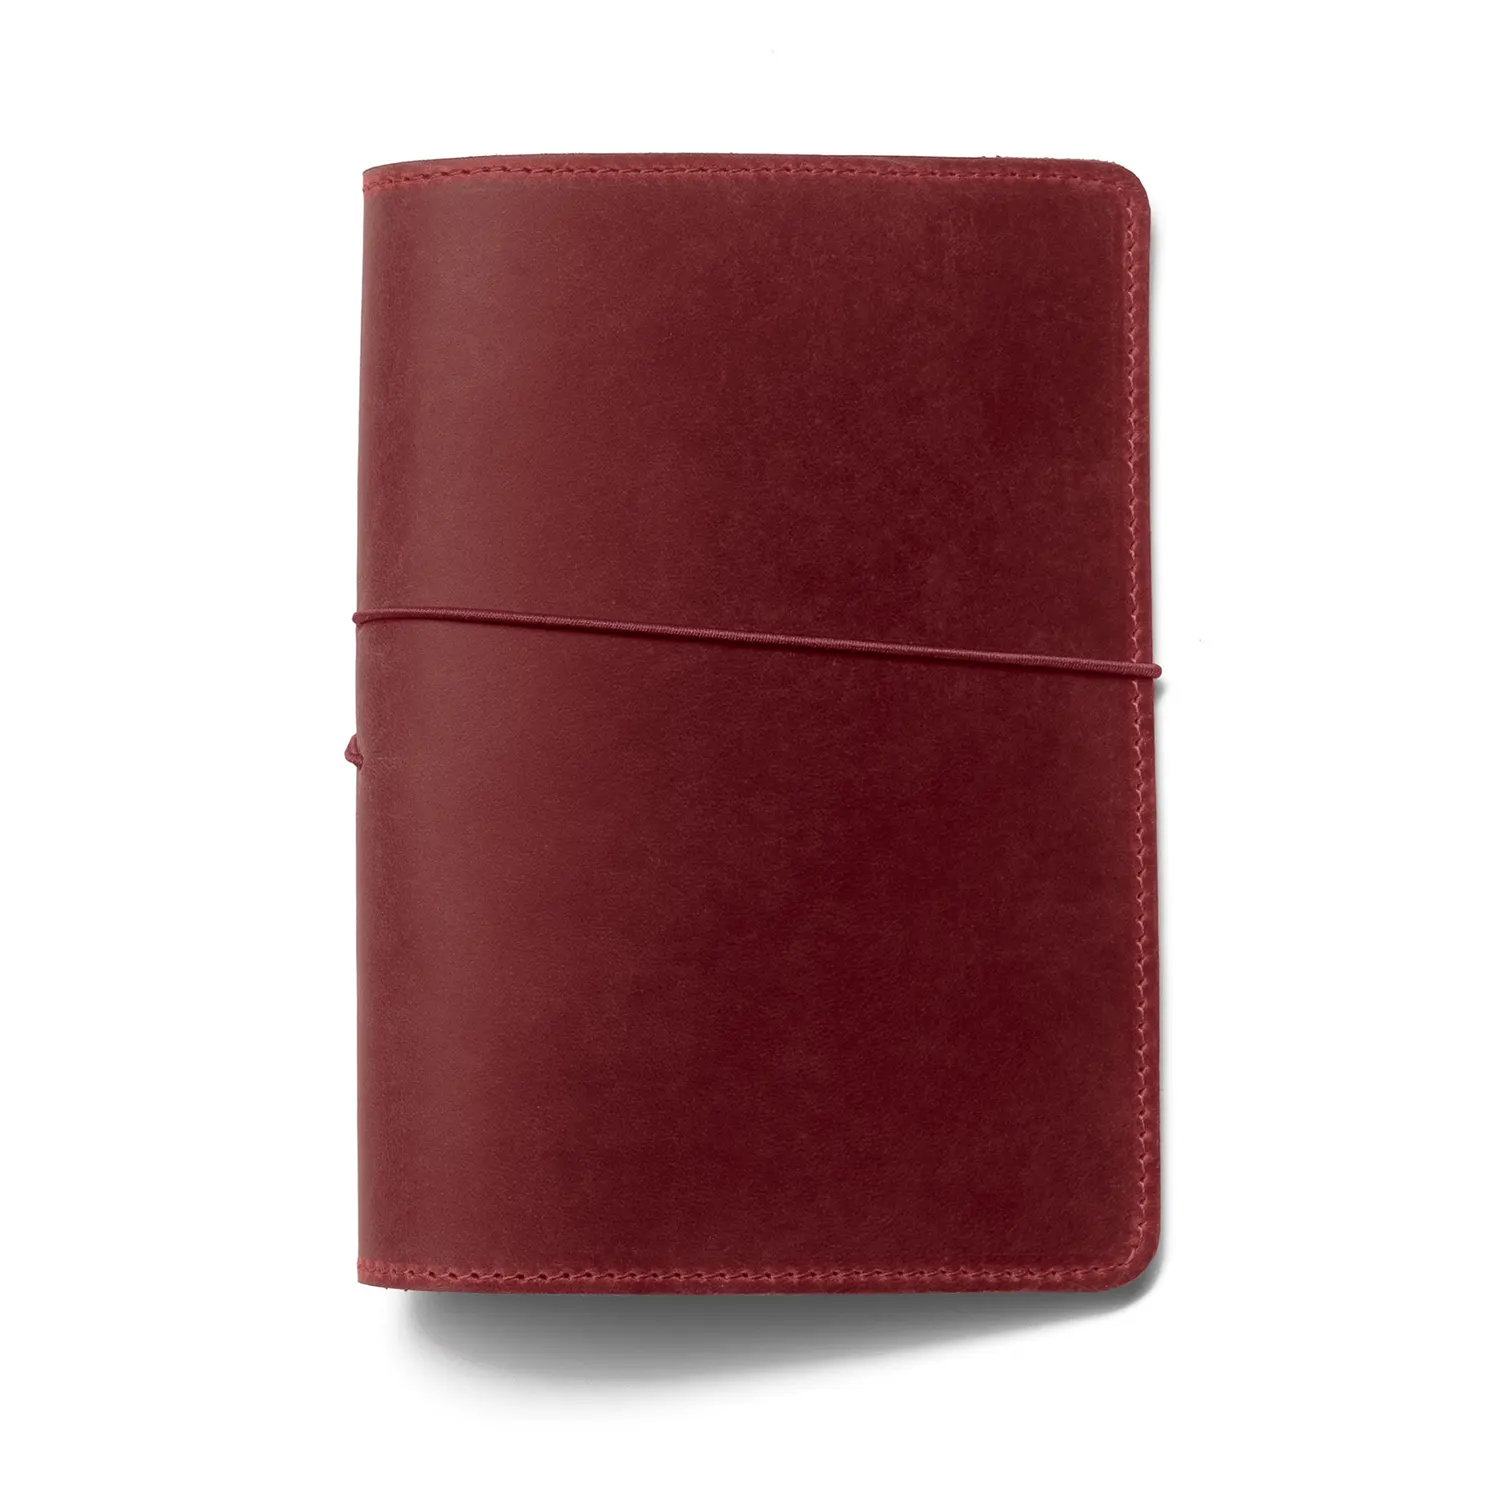 Simple Plain Design Durable Cowhide Leather Notebook Cover Professional Office Dairy Leather Notebook Protection Cover